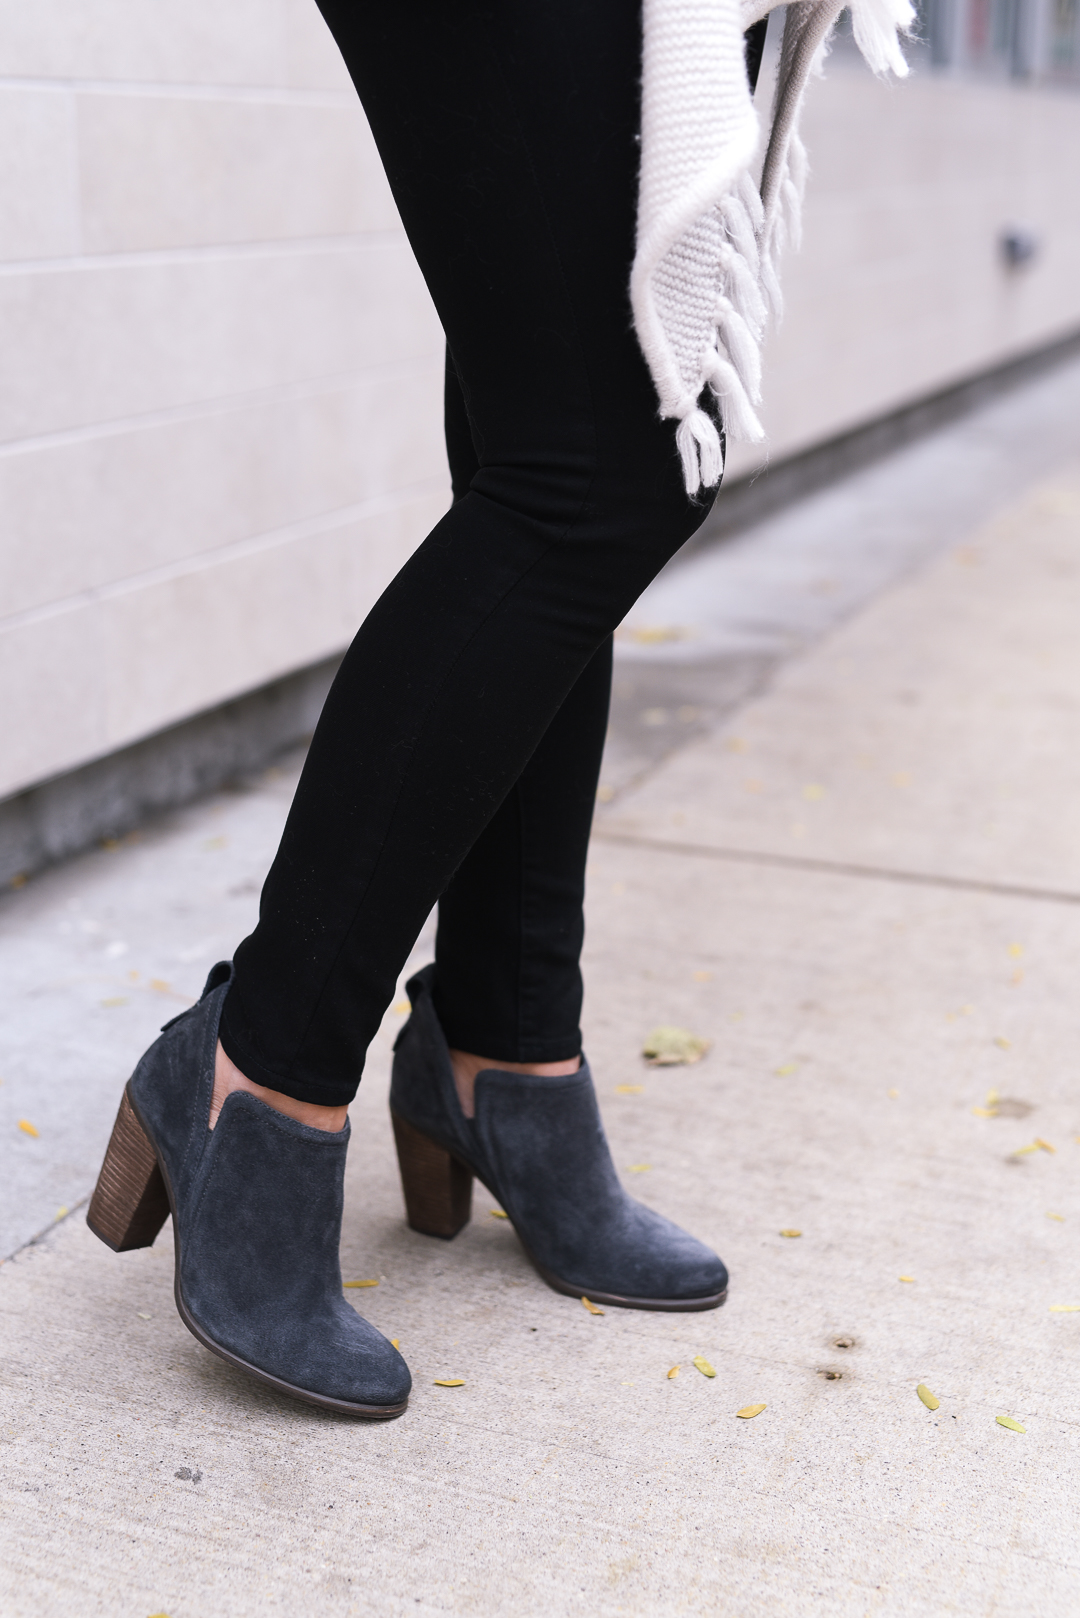 best grey suede boots on sale at nordstrom